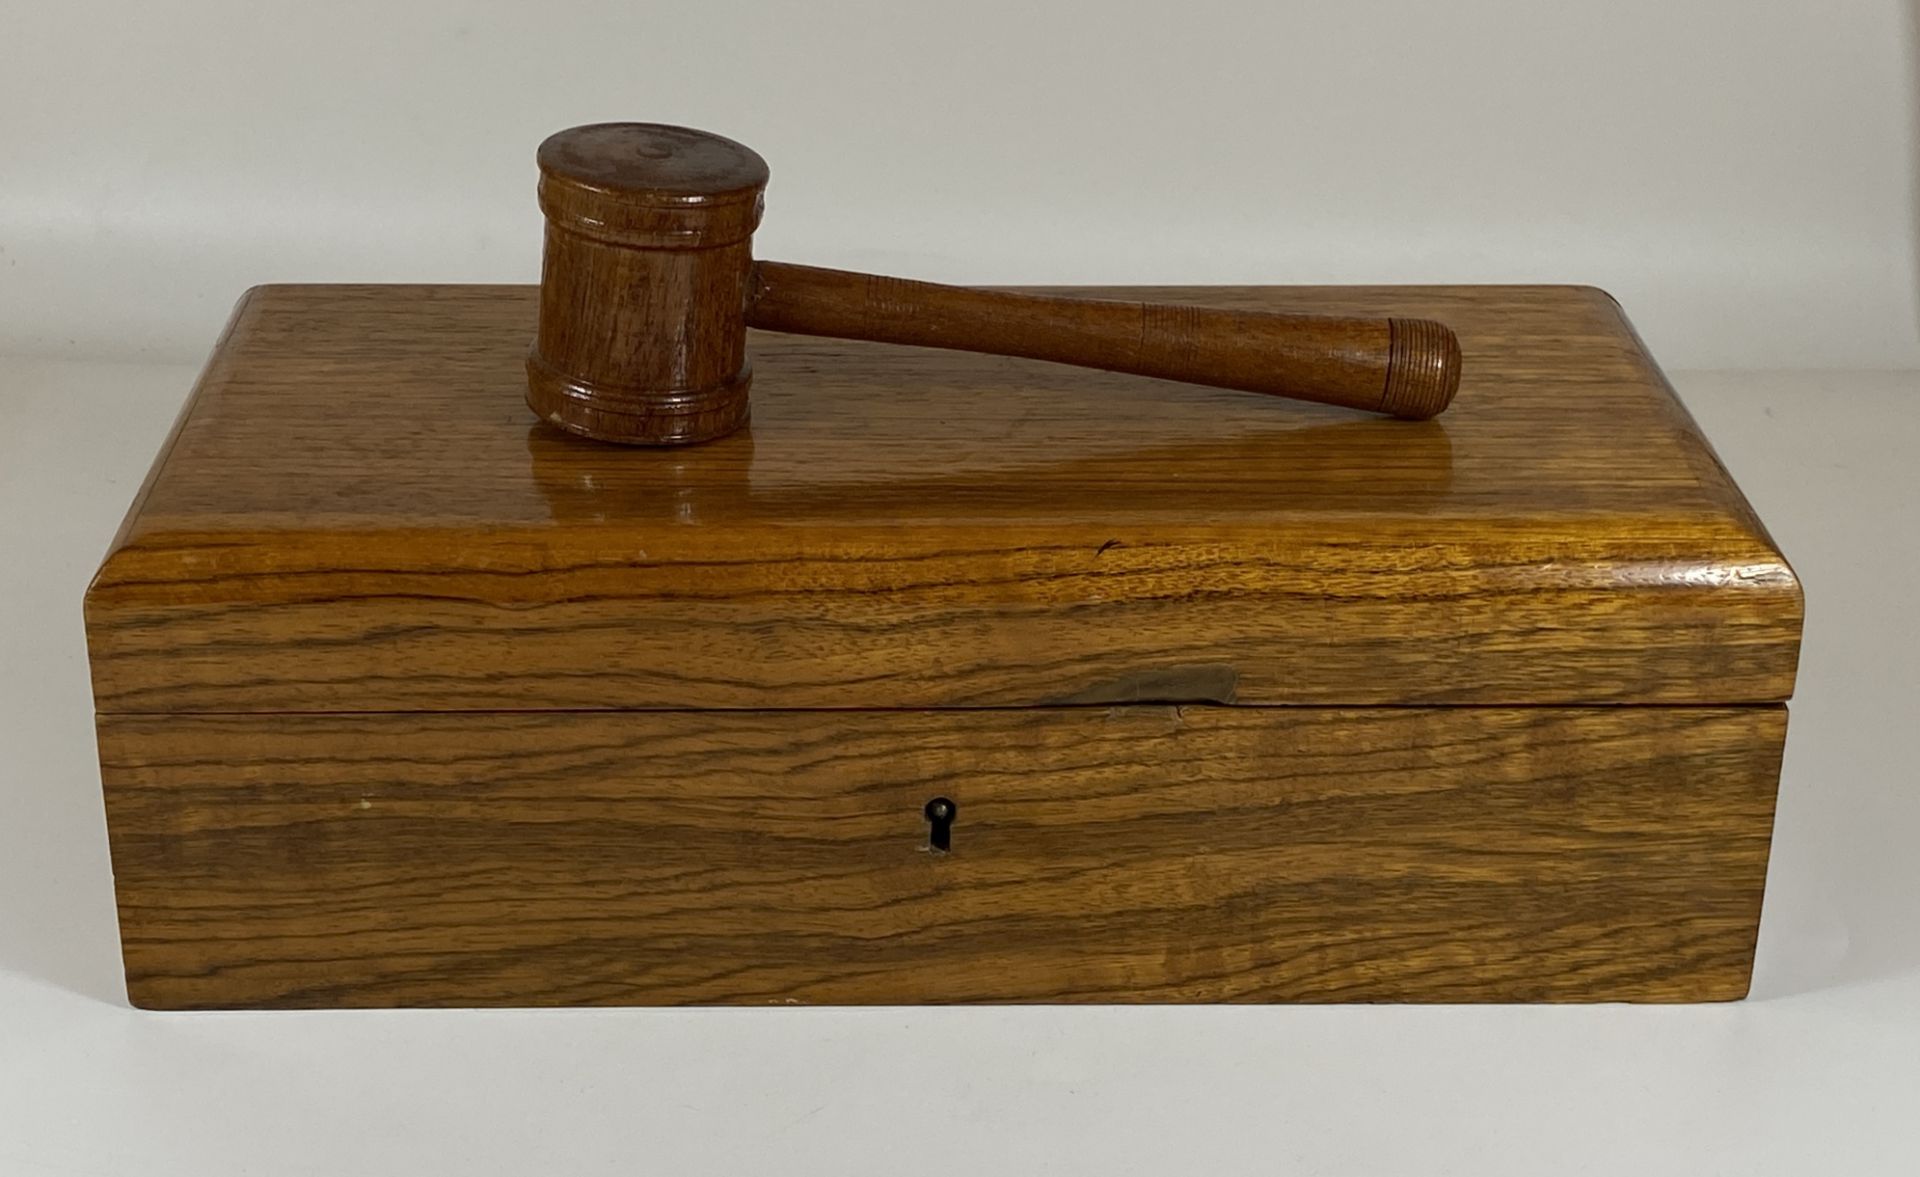 TWO ITEMS - A VINTAGE OAK BOX WITH INNER PULL OUT CUTLERY DRAWER AND A HARDWOOD AUCTIONEER'S GAVEL